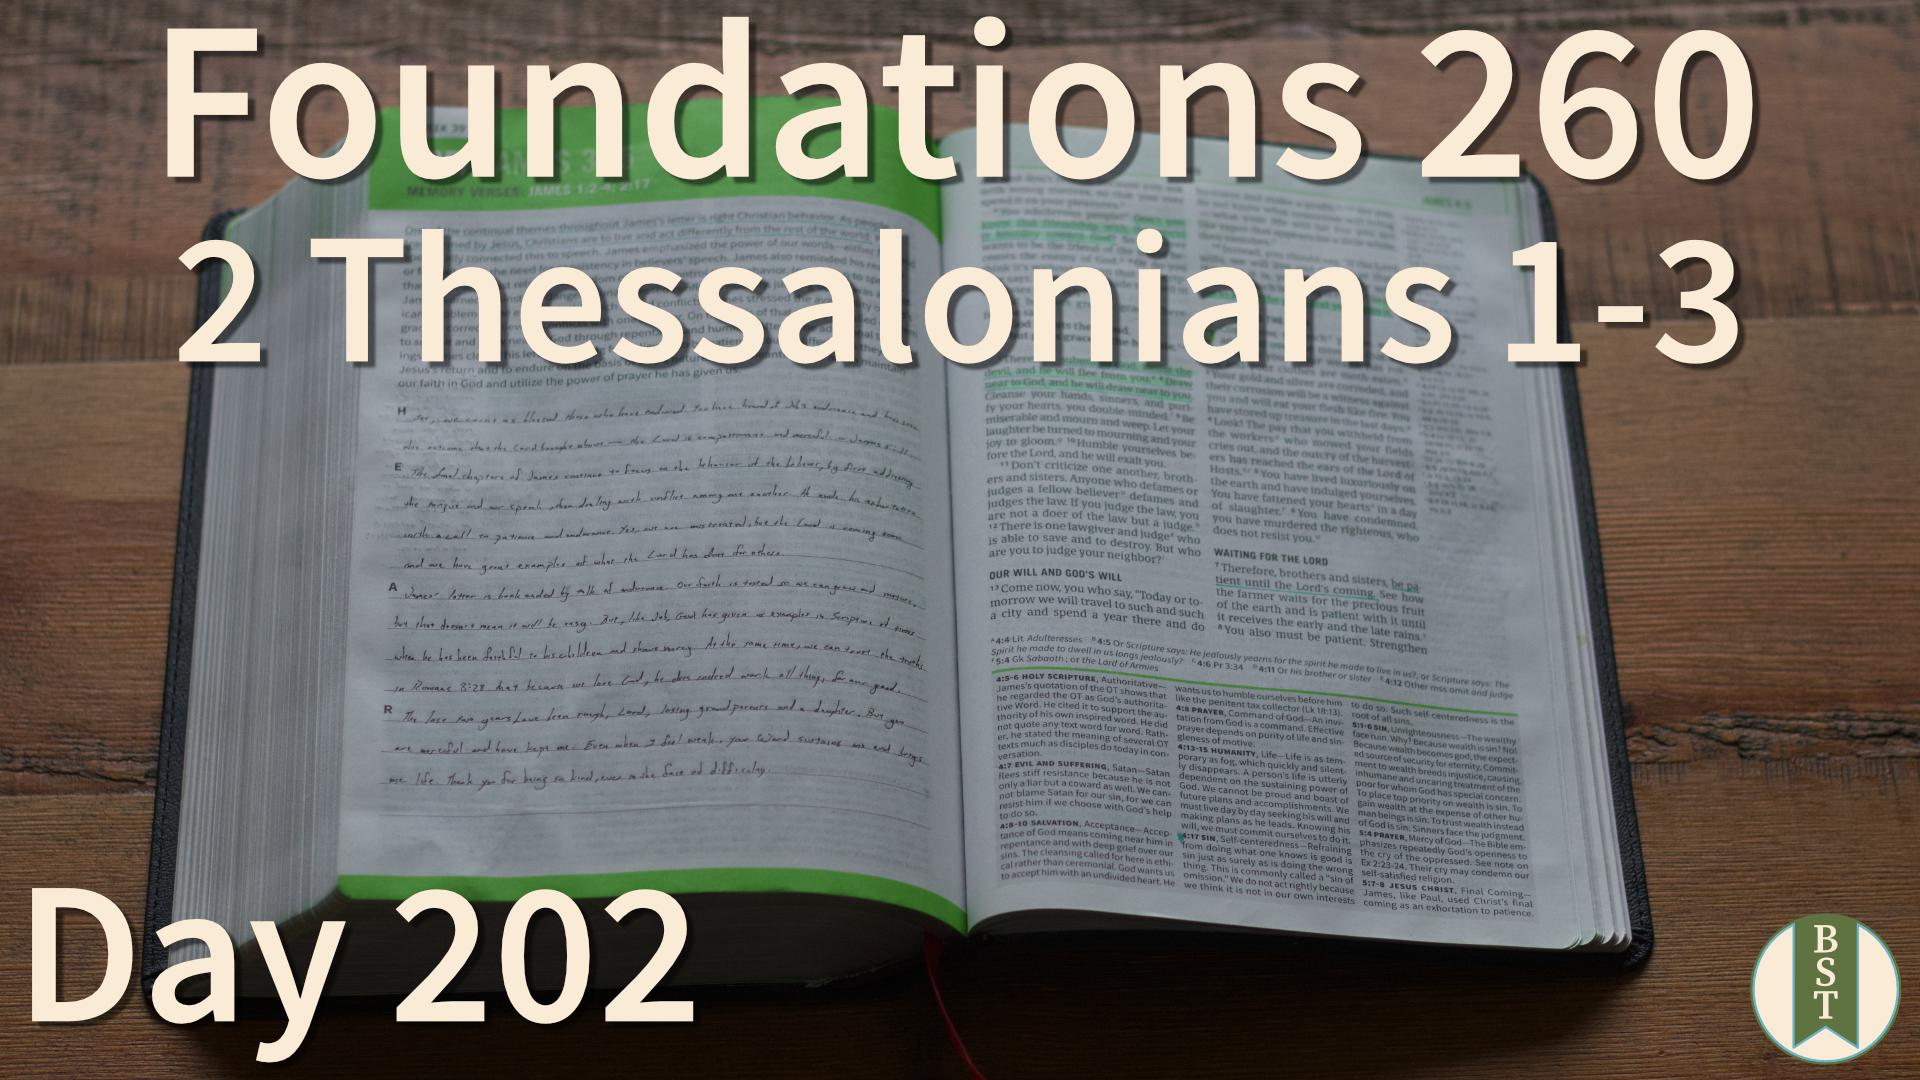 F260 Day 202: 2 Thessalonians 1-3